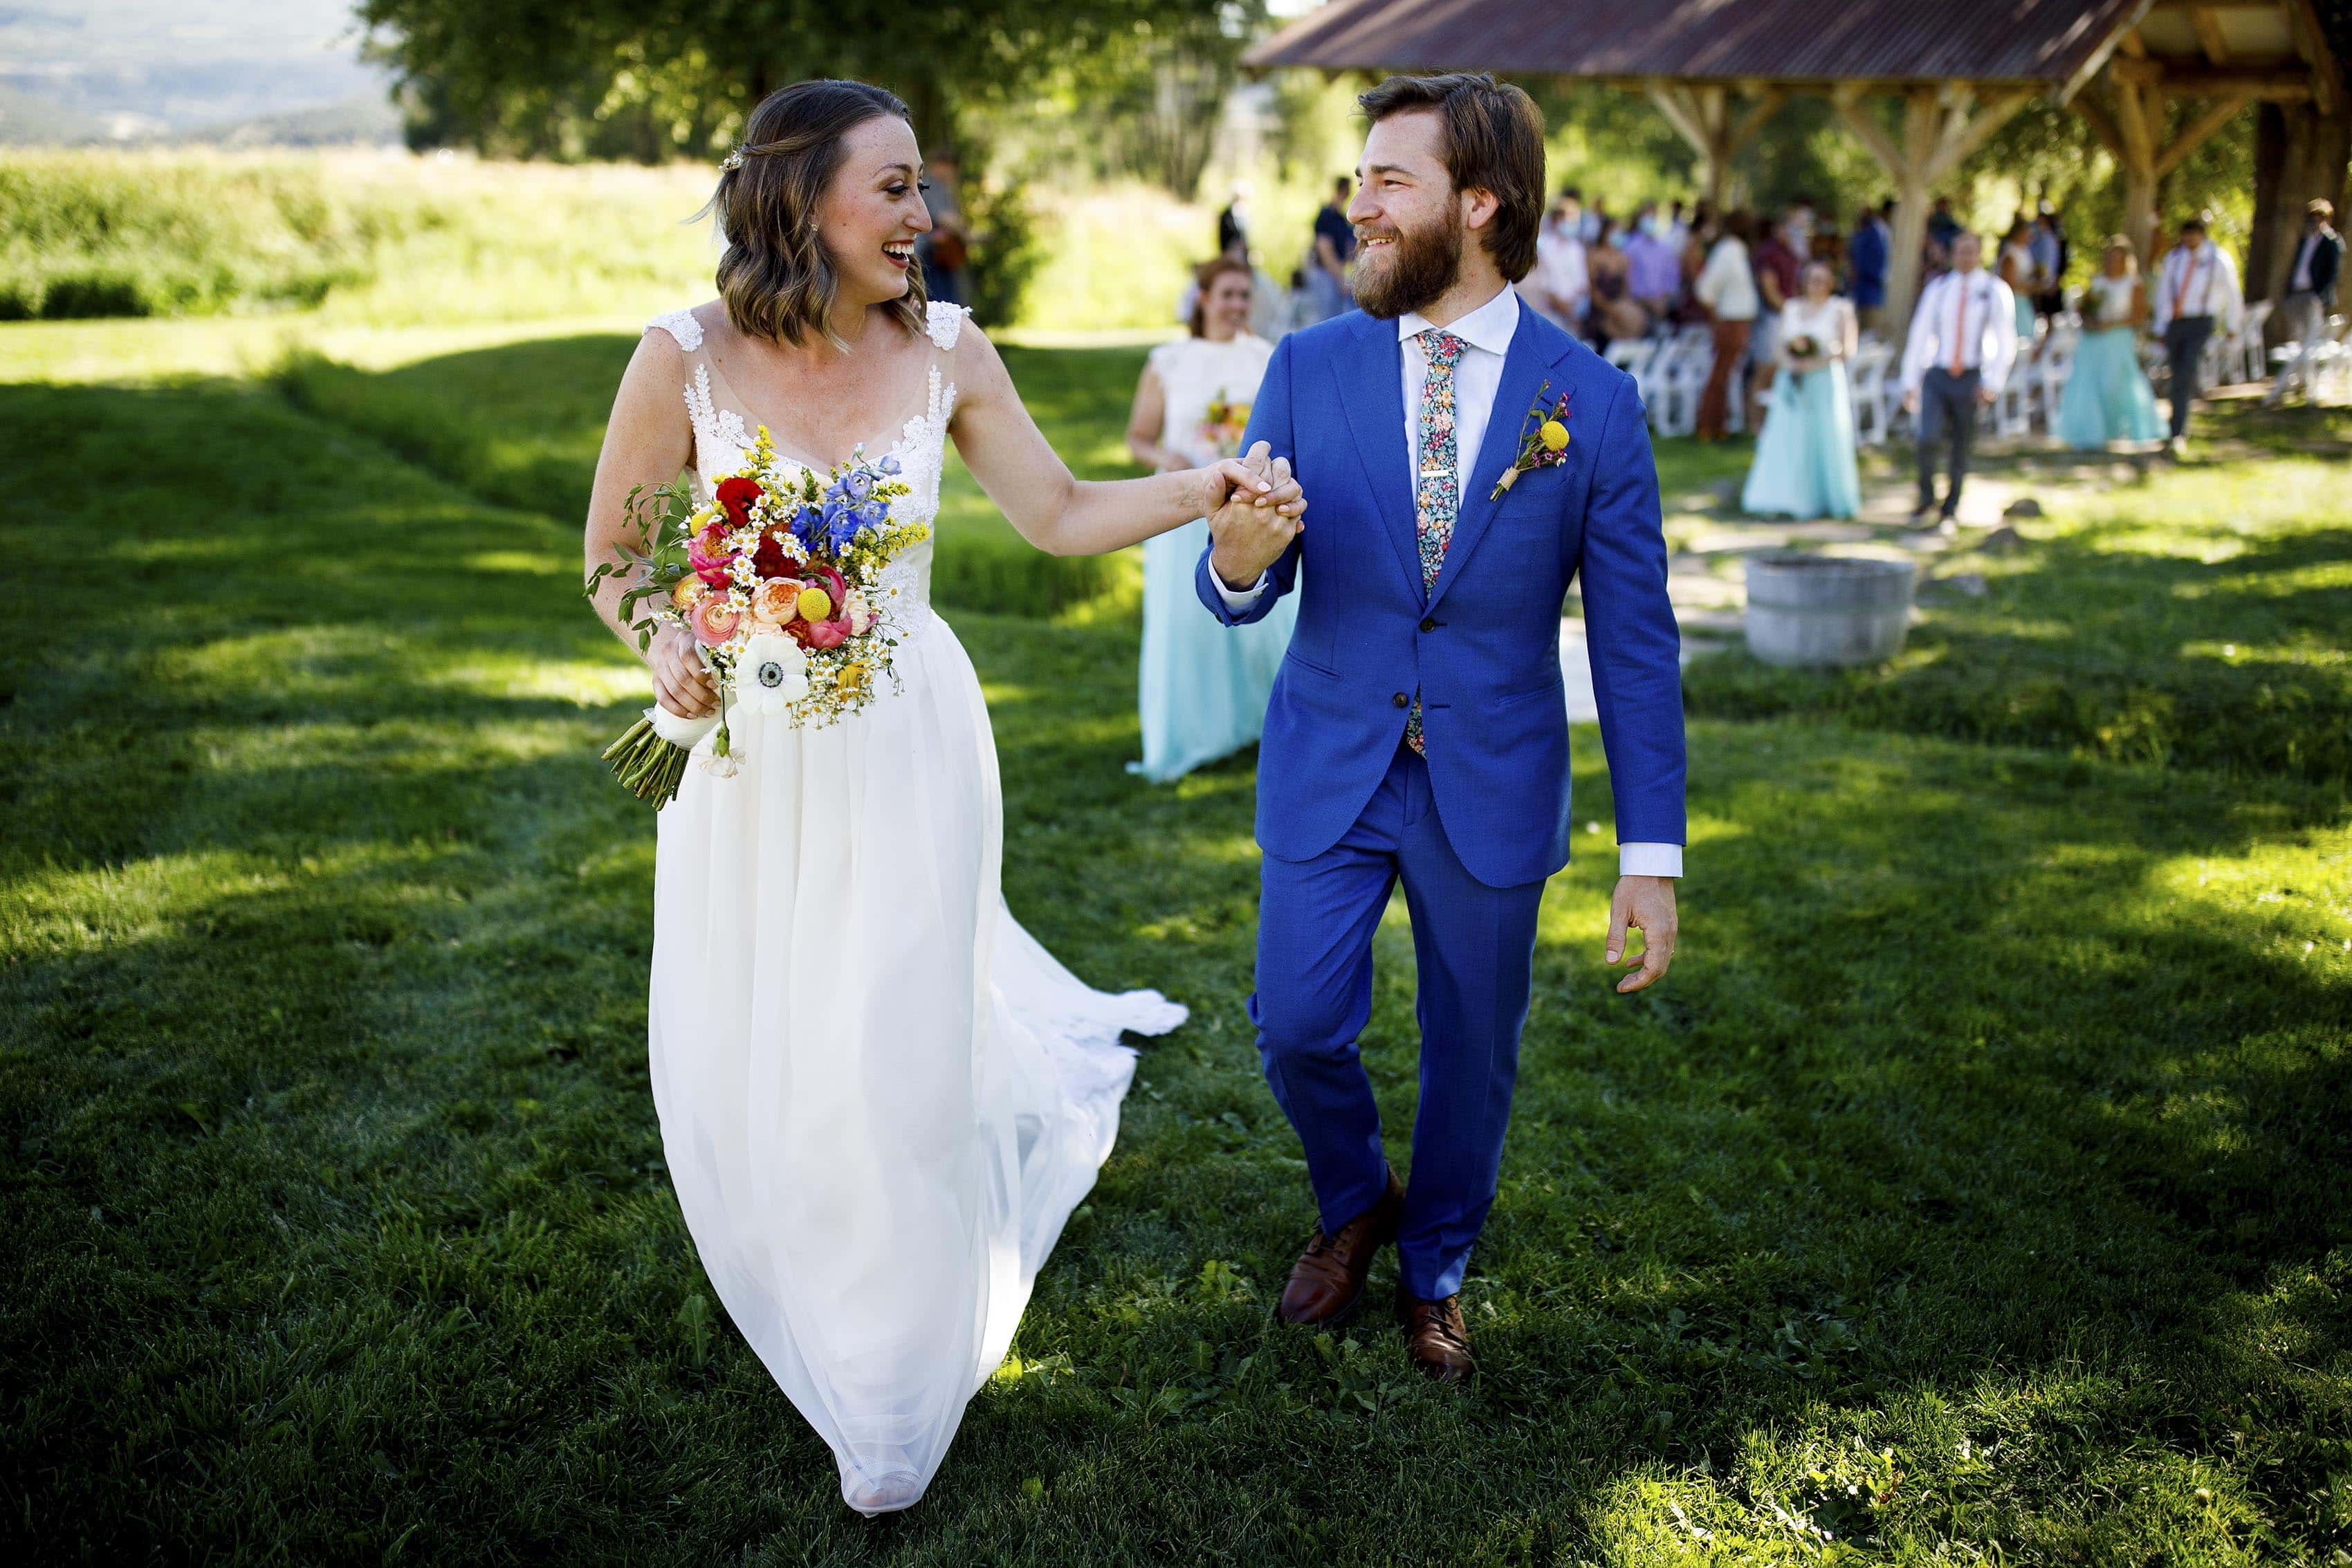 Laura and Ryan celebrate after their wedding ceremony at 4 Eagle Ranch in Wolcott, CO